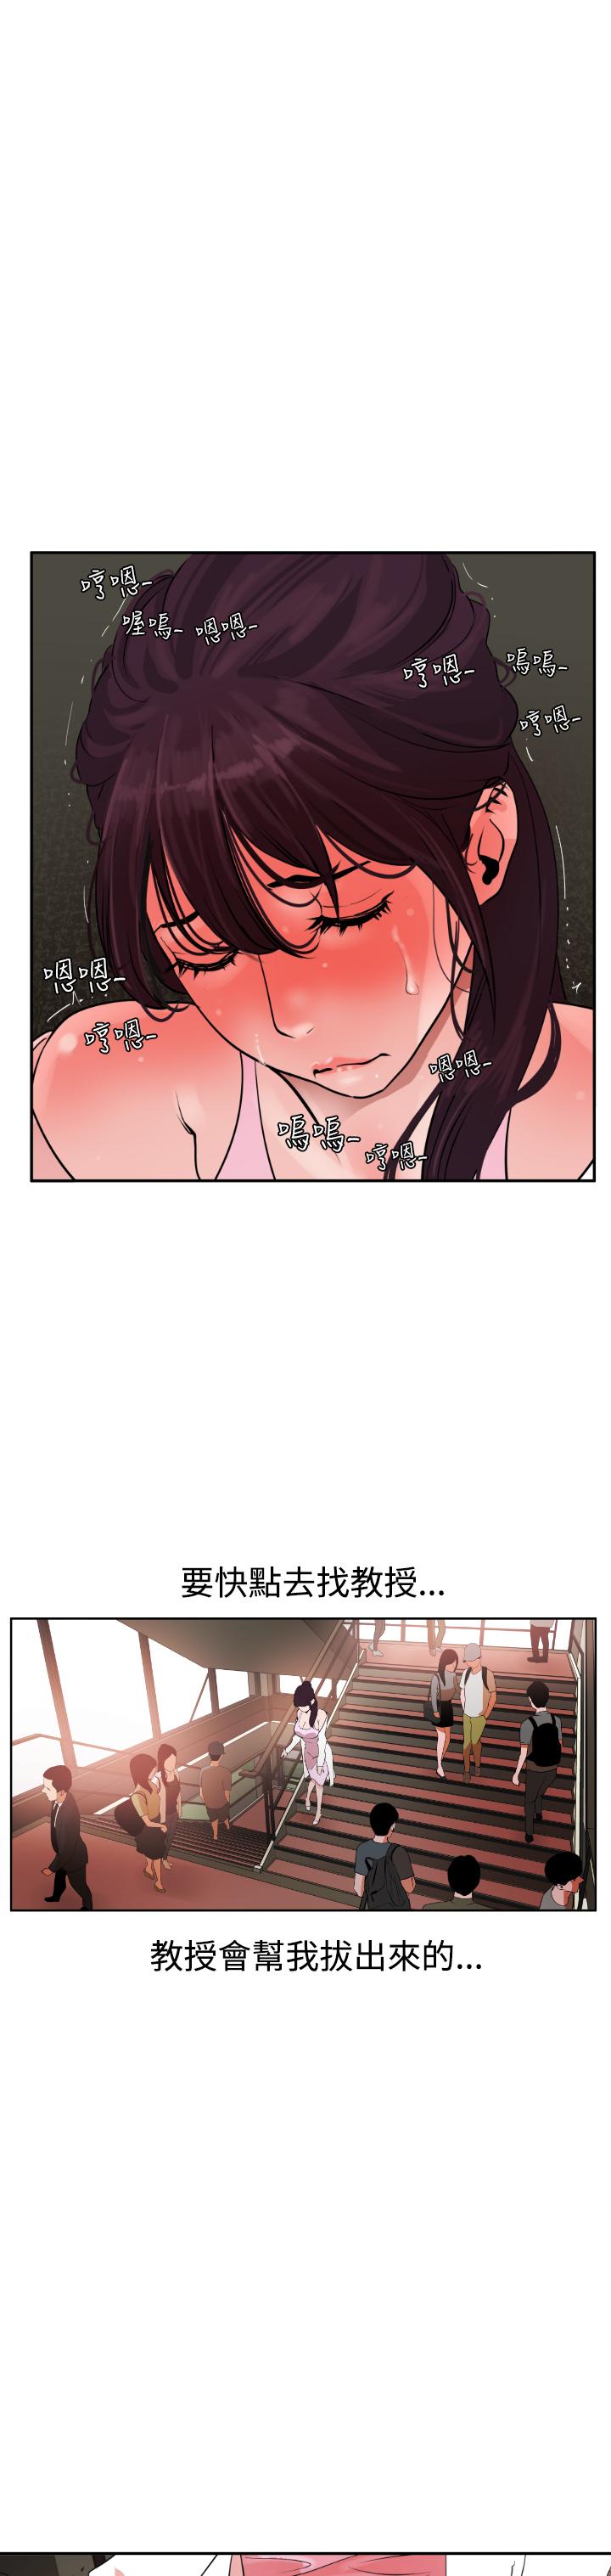 Desire King (慾求王) Ch.1-16 (chinese) 243